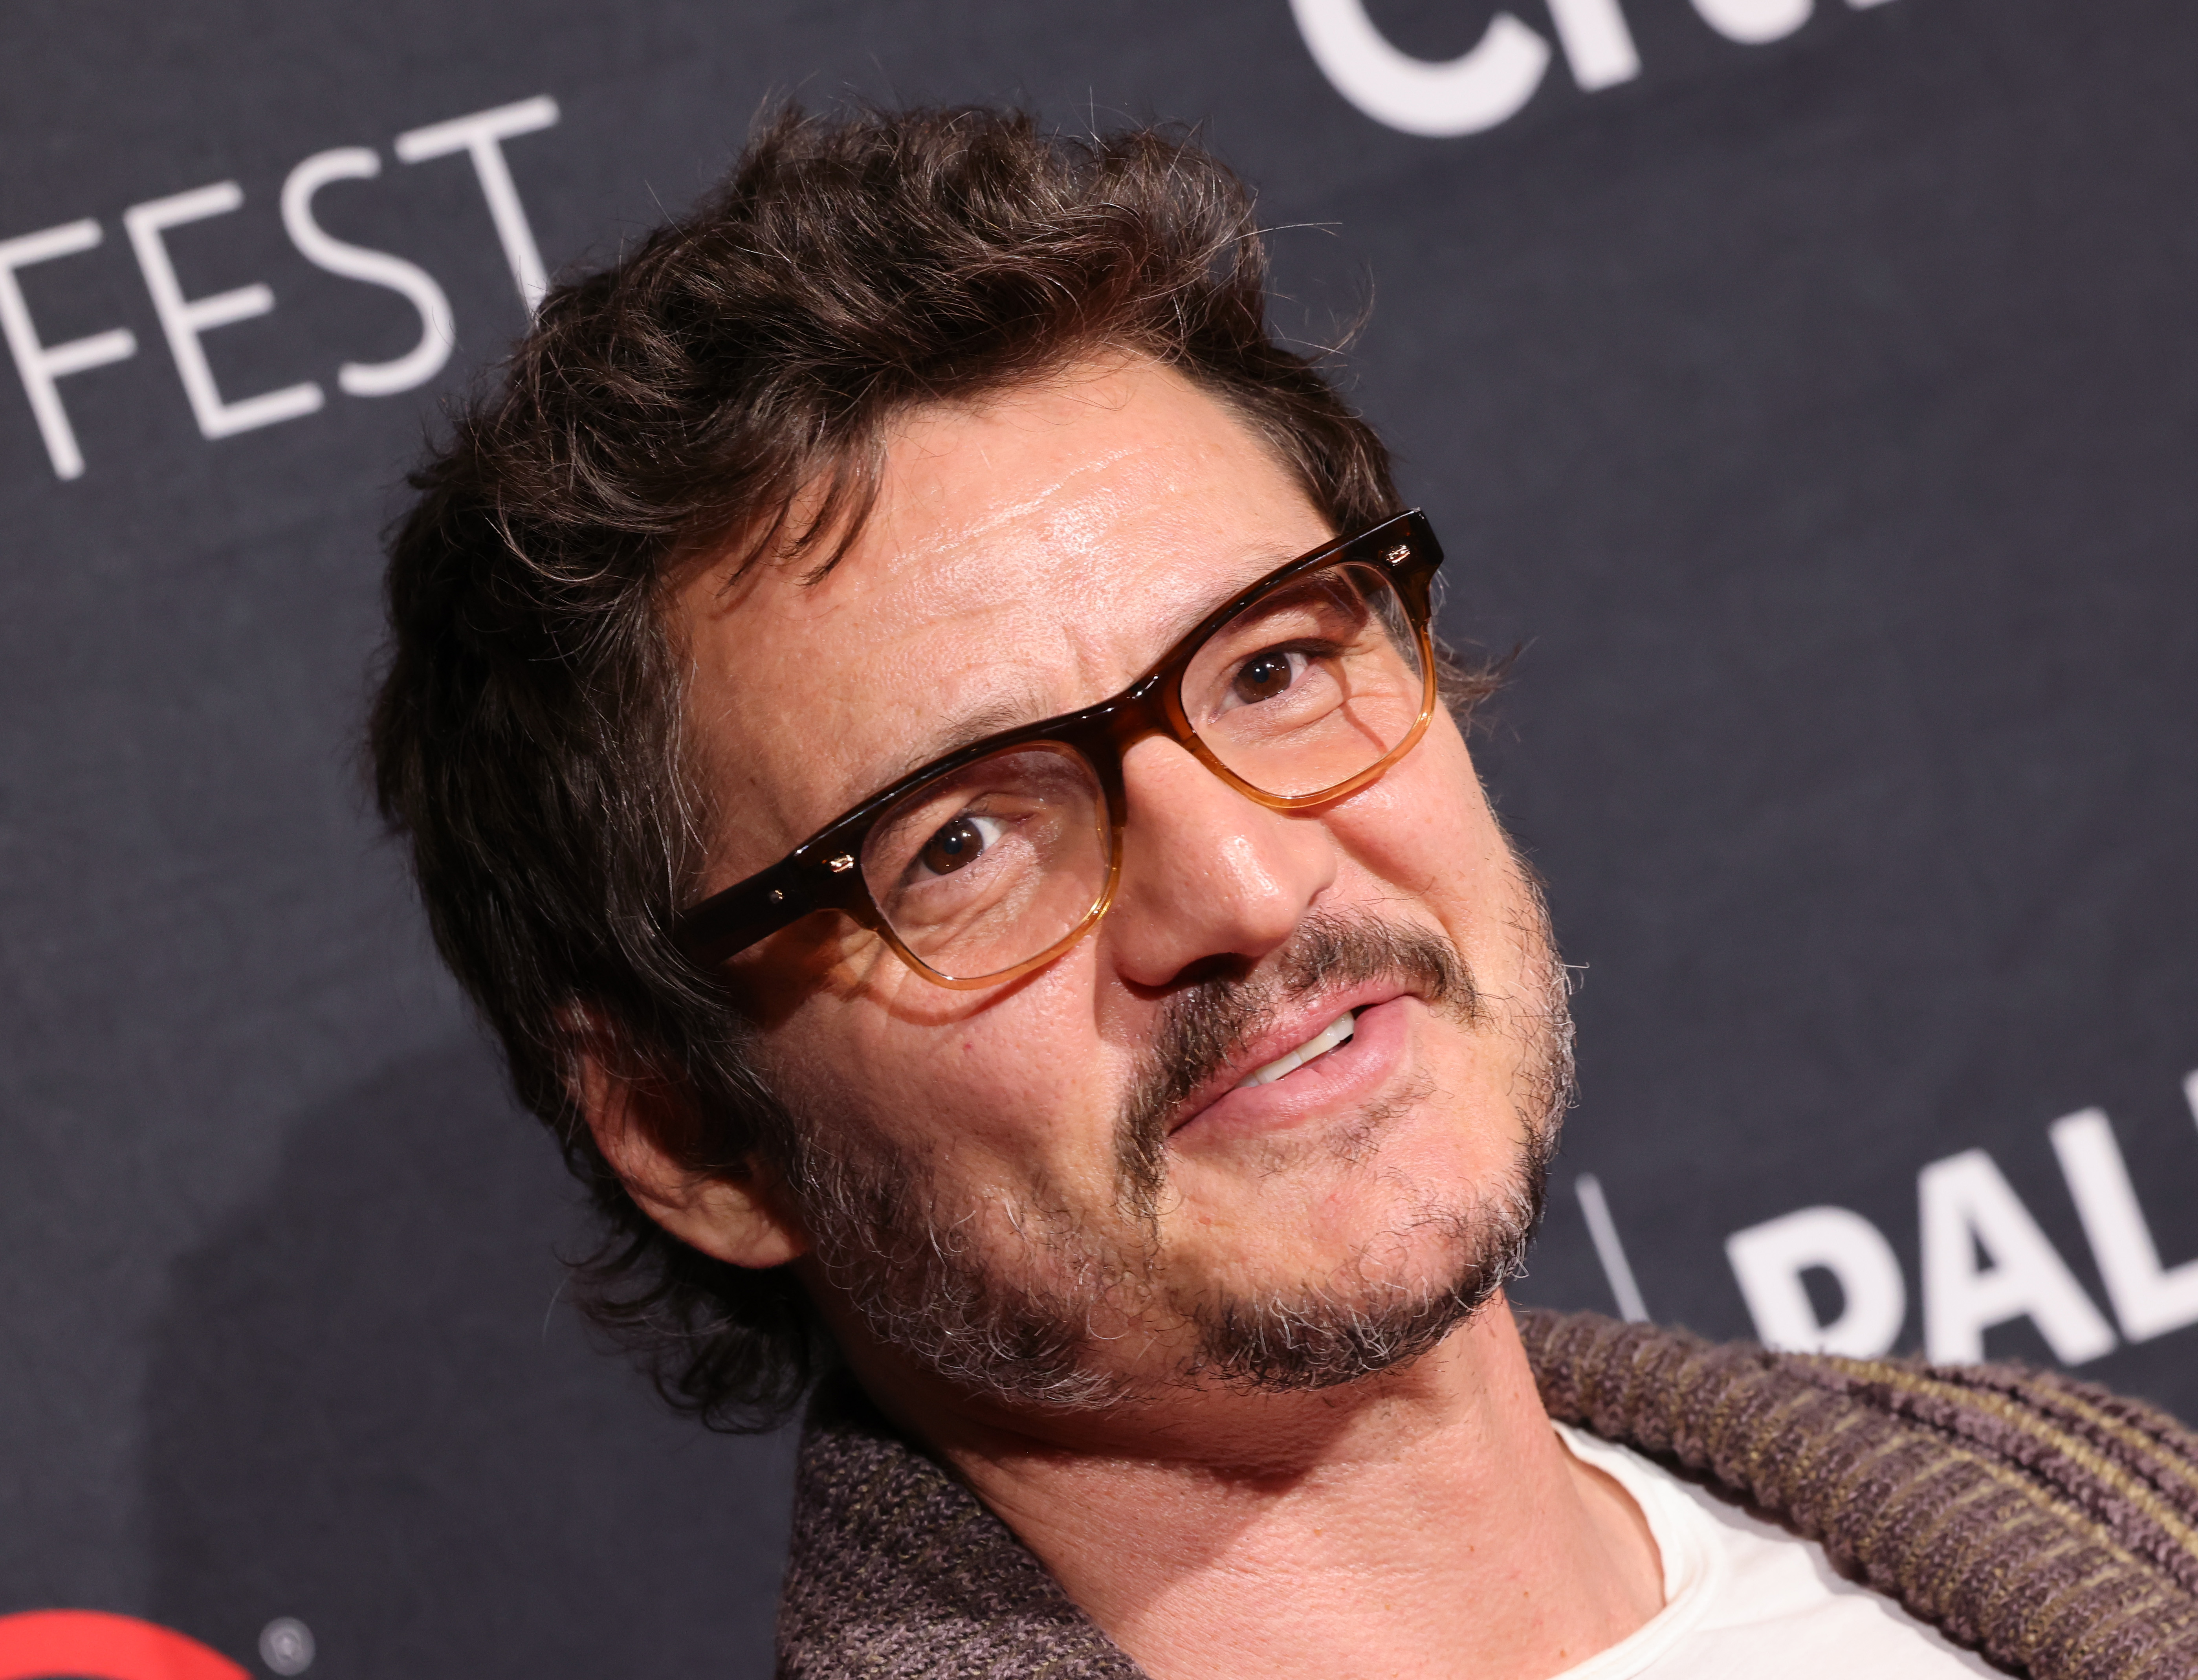 Pedro Pascal in glasses and a brown cardigan.